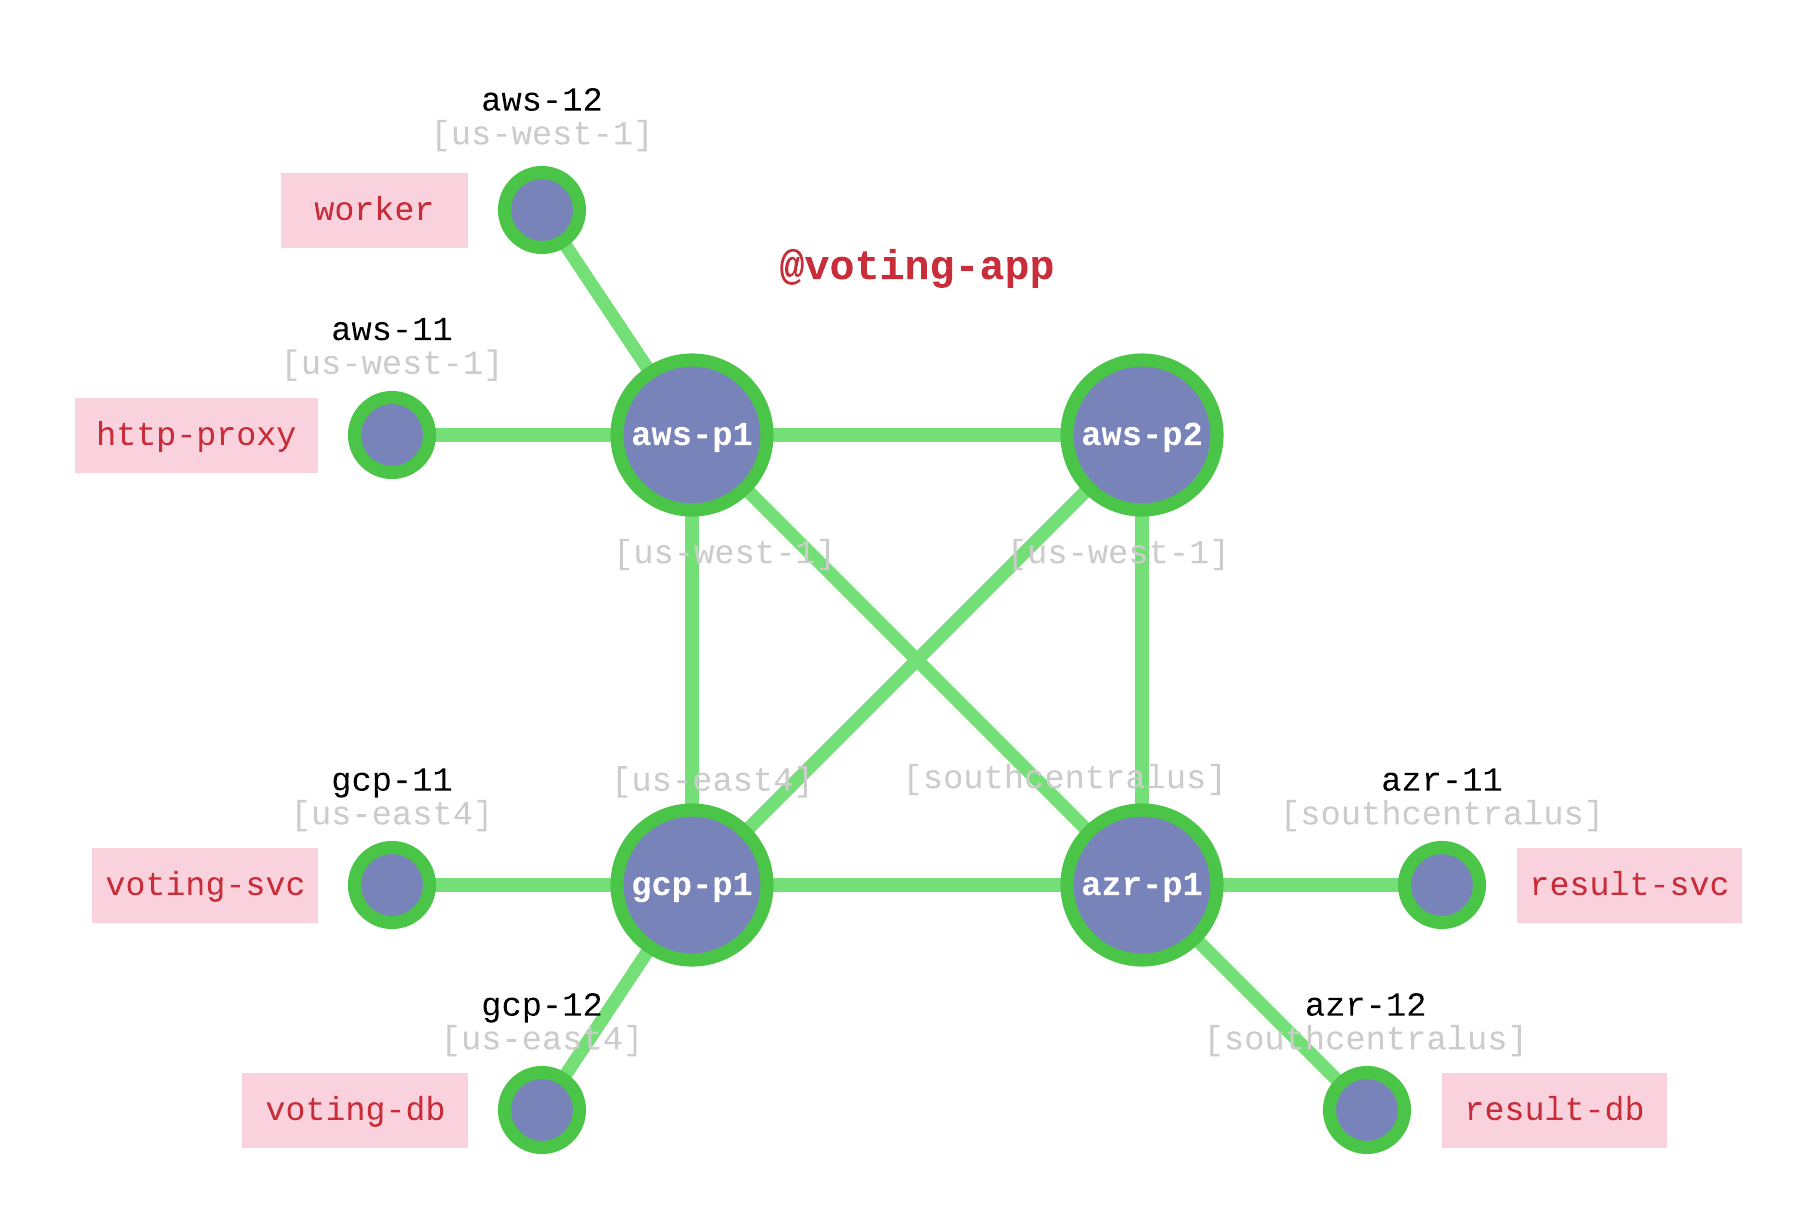 Voting App Deployment on the Interconnection Fabric